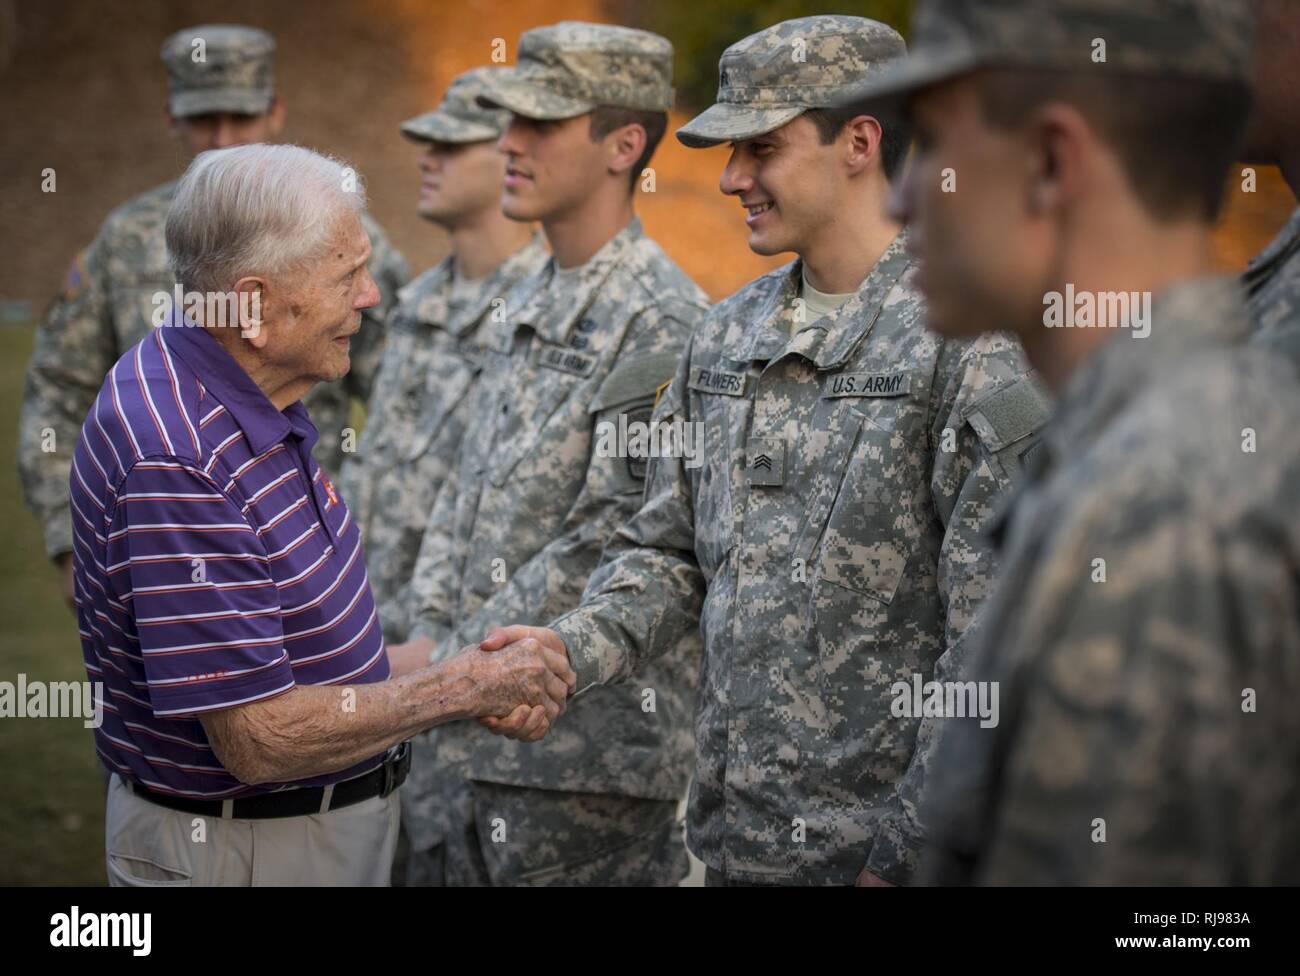 Clemson Univeristy professor emeritus, alumnus, and WWII hero Ben Skardon, 99, a survivor of the Bataan Death March, greets ROTC cadets who came to place flags around the Scroll of Honor for Military Appreciation Day, Nov. 3, 2016. Stock Photo